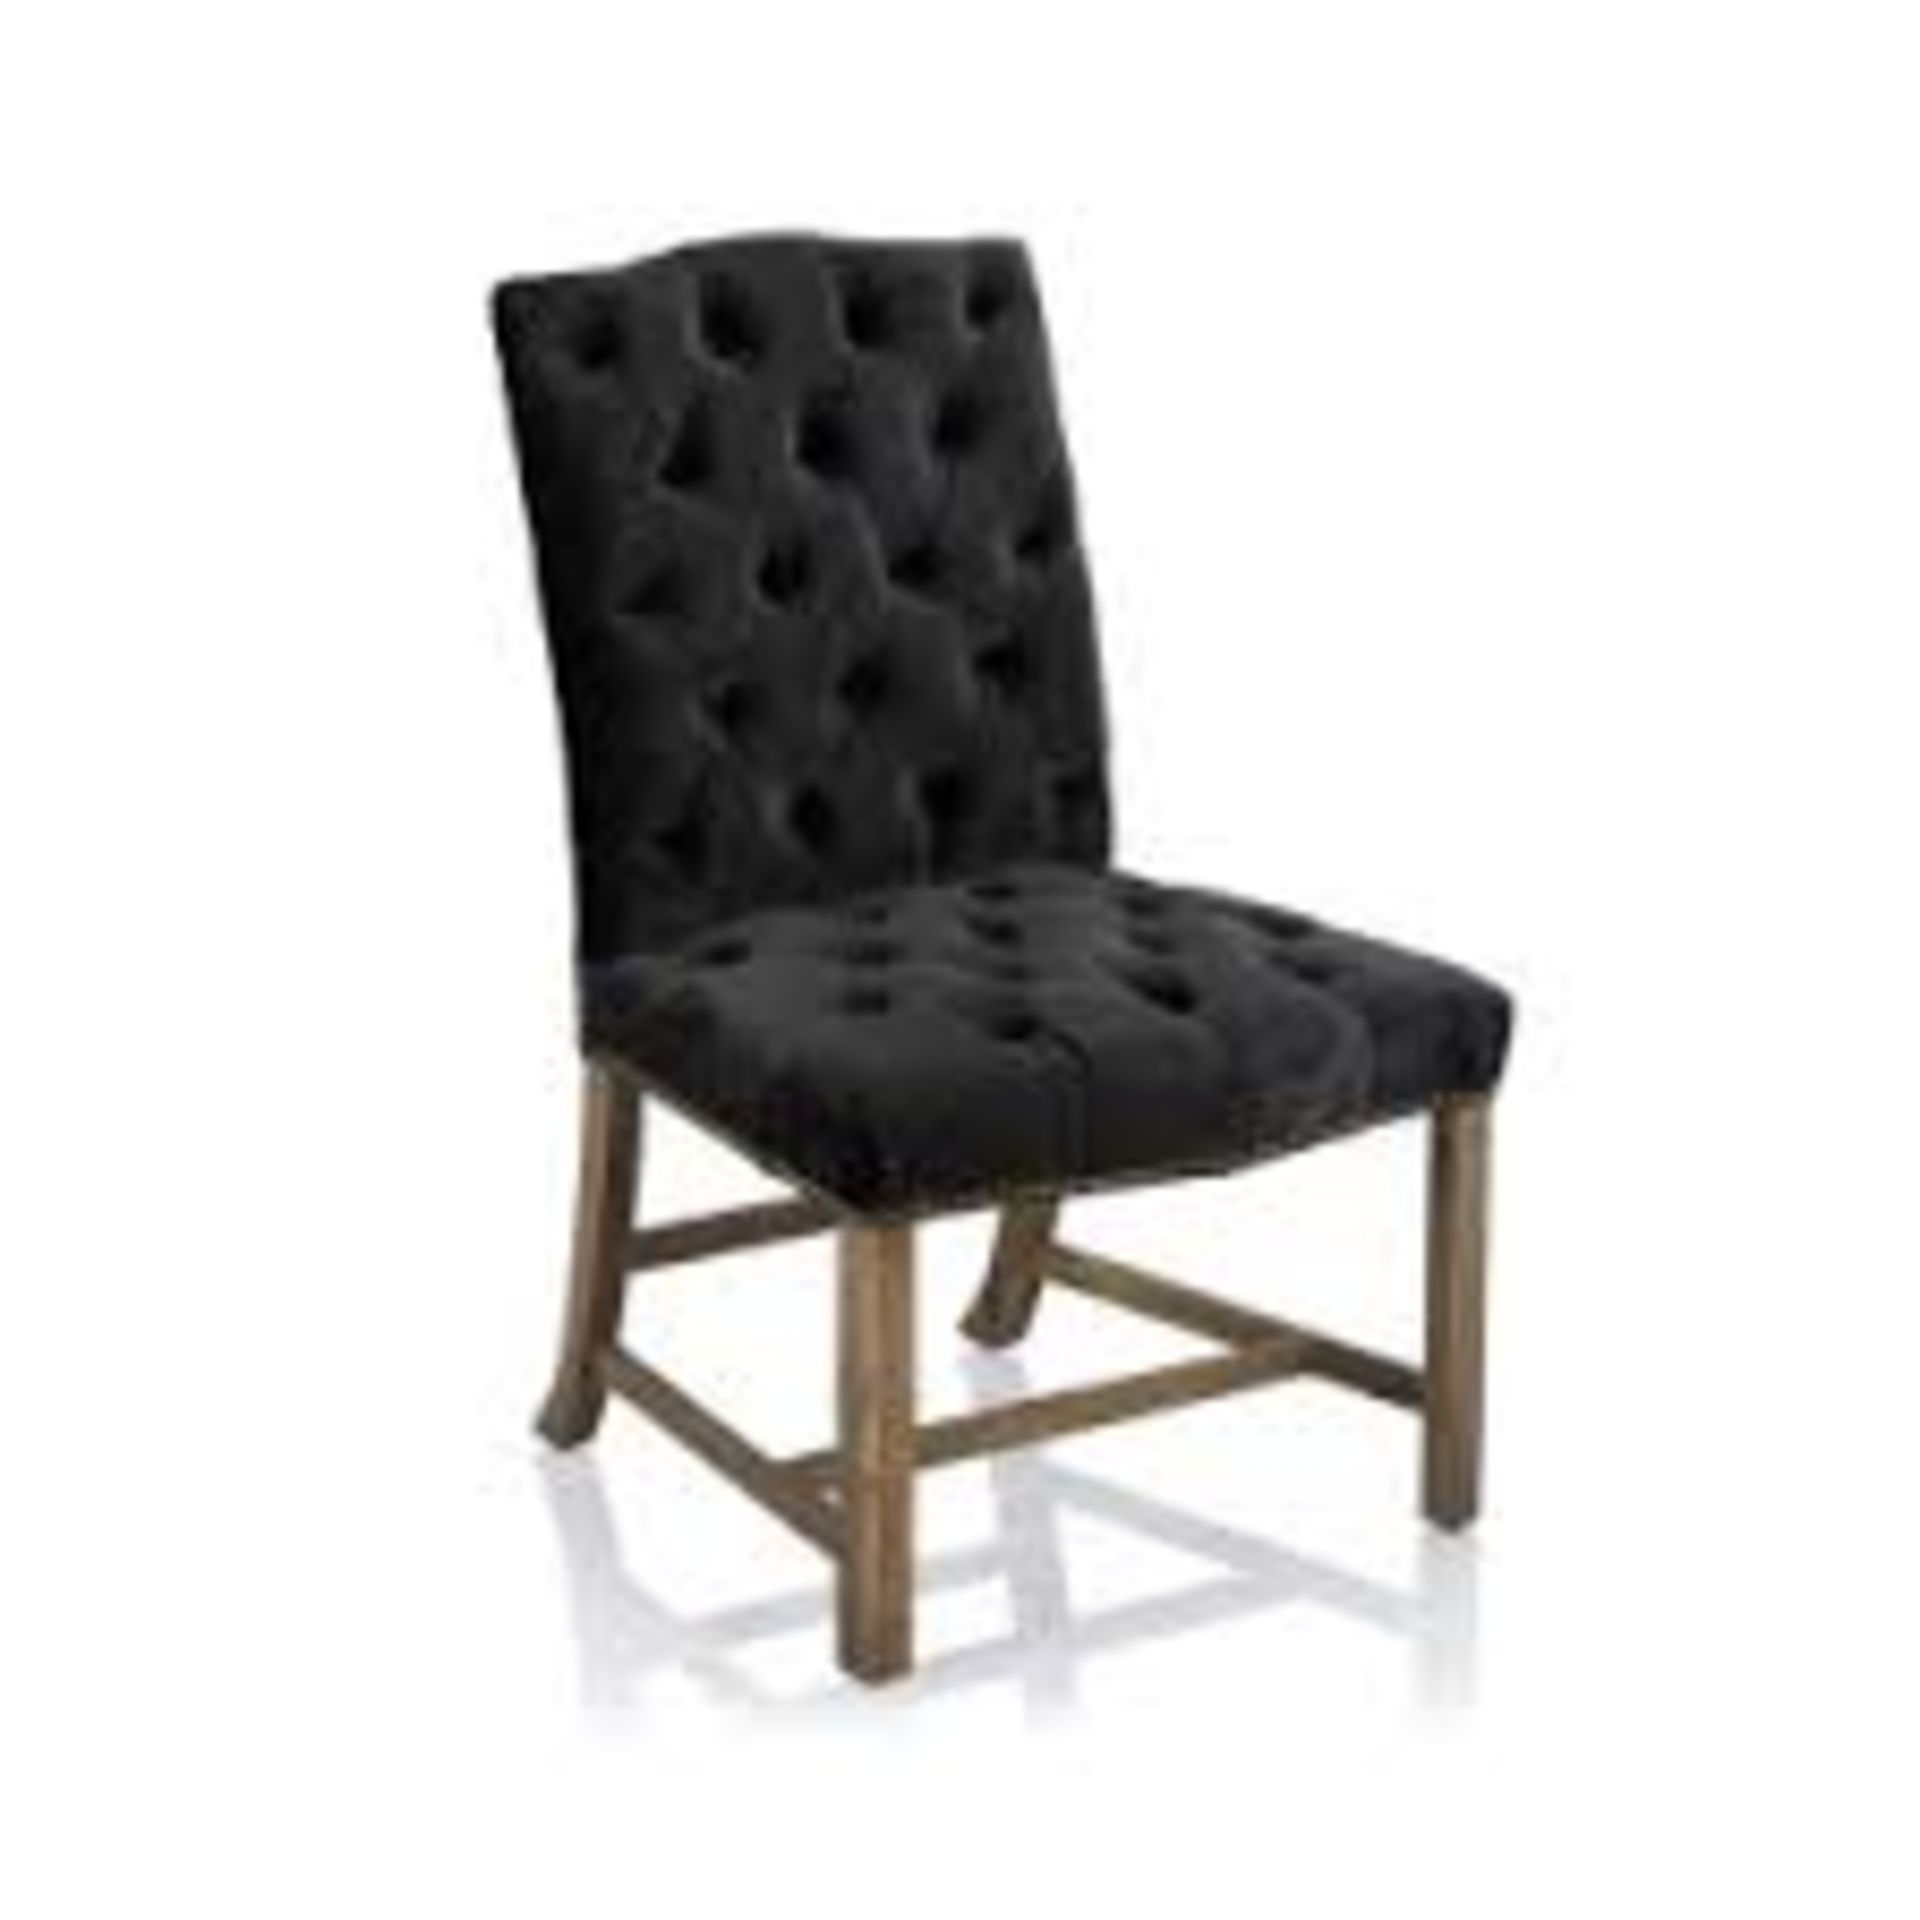 Regency Dining Chair -Siren Rose & Weathered Oak 60 X 67 X 98cm Inspired By Brighton Pavilion In - Image 2 of 2